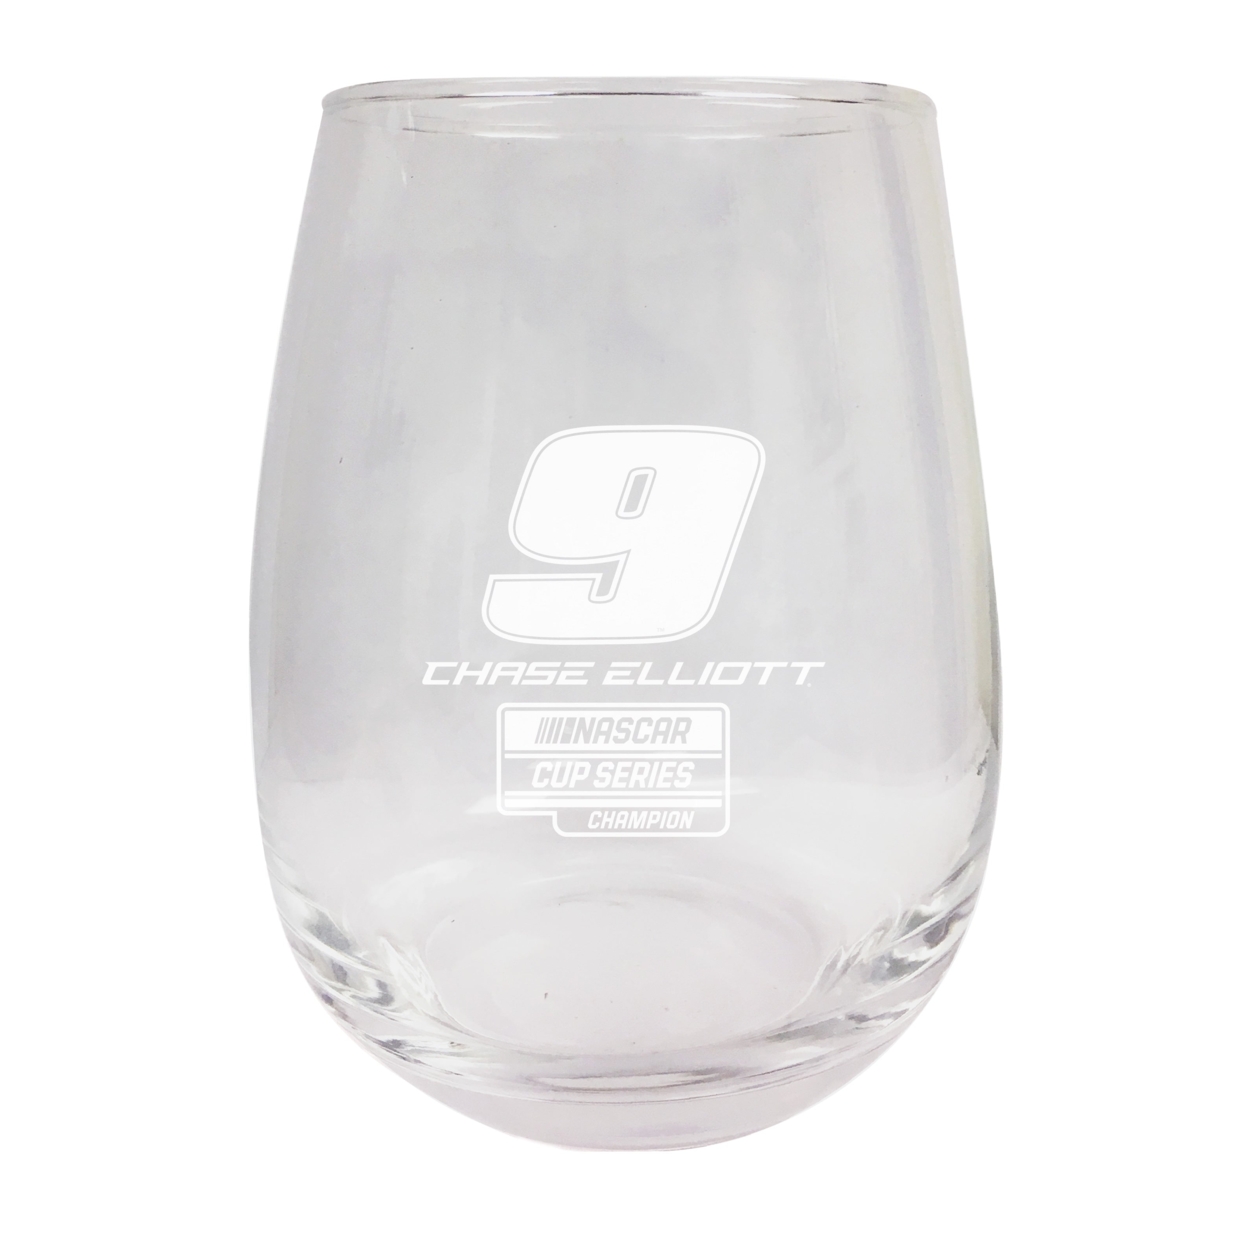 R And R Imports Chase Elliott NASCAR 2020 Champion Etched Stemless Glass 9 Oz 2-Pack